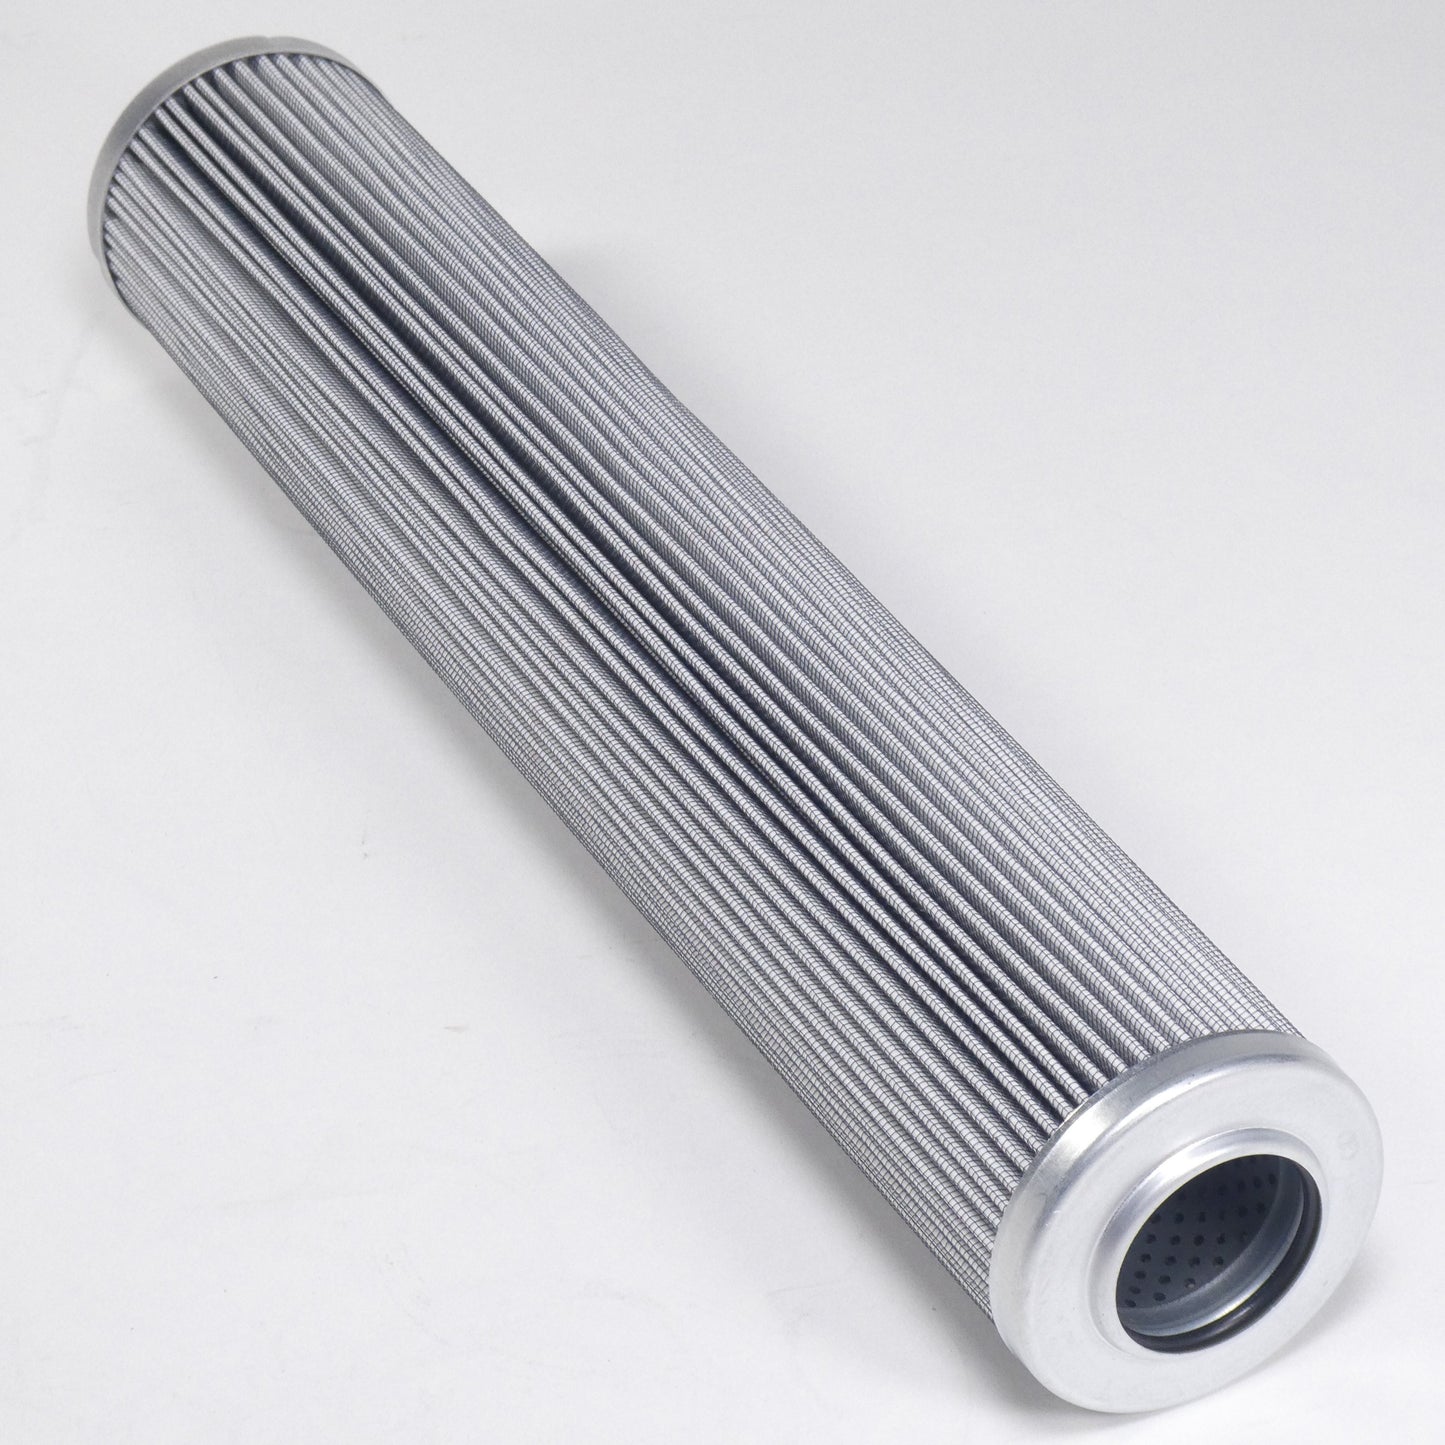 Hydrafil Replacement Filter Element for Hydac H-9600/16-003BN-V